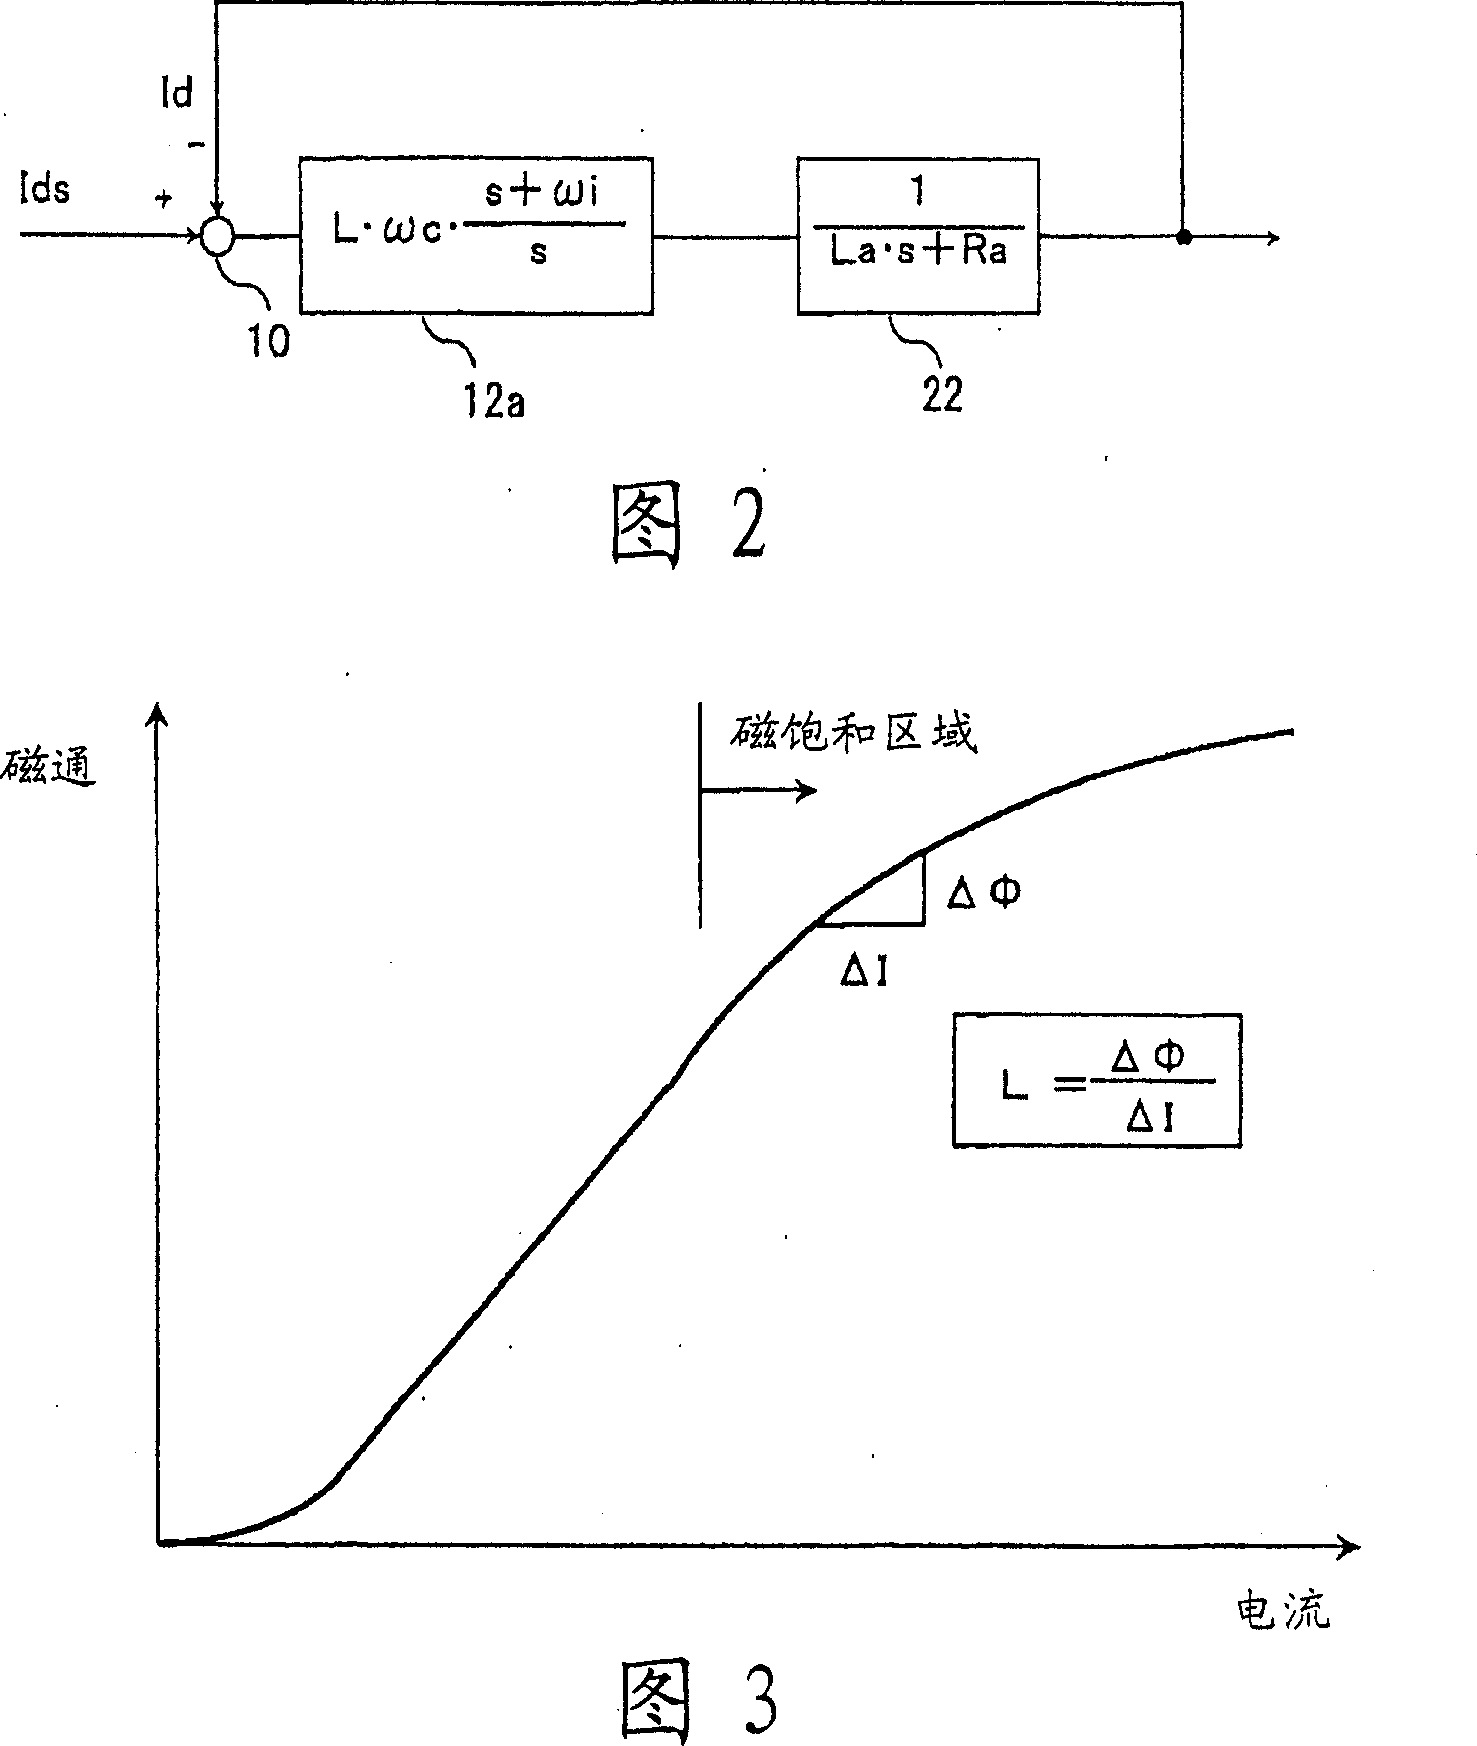 Controlling device of permanent-magnet synchro motor